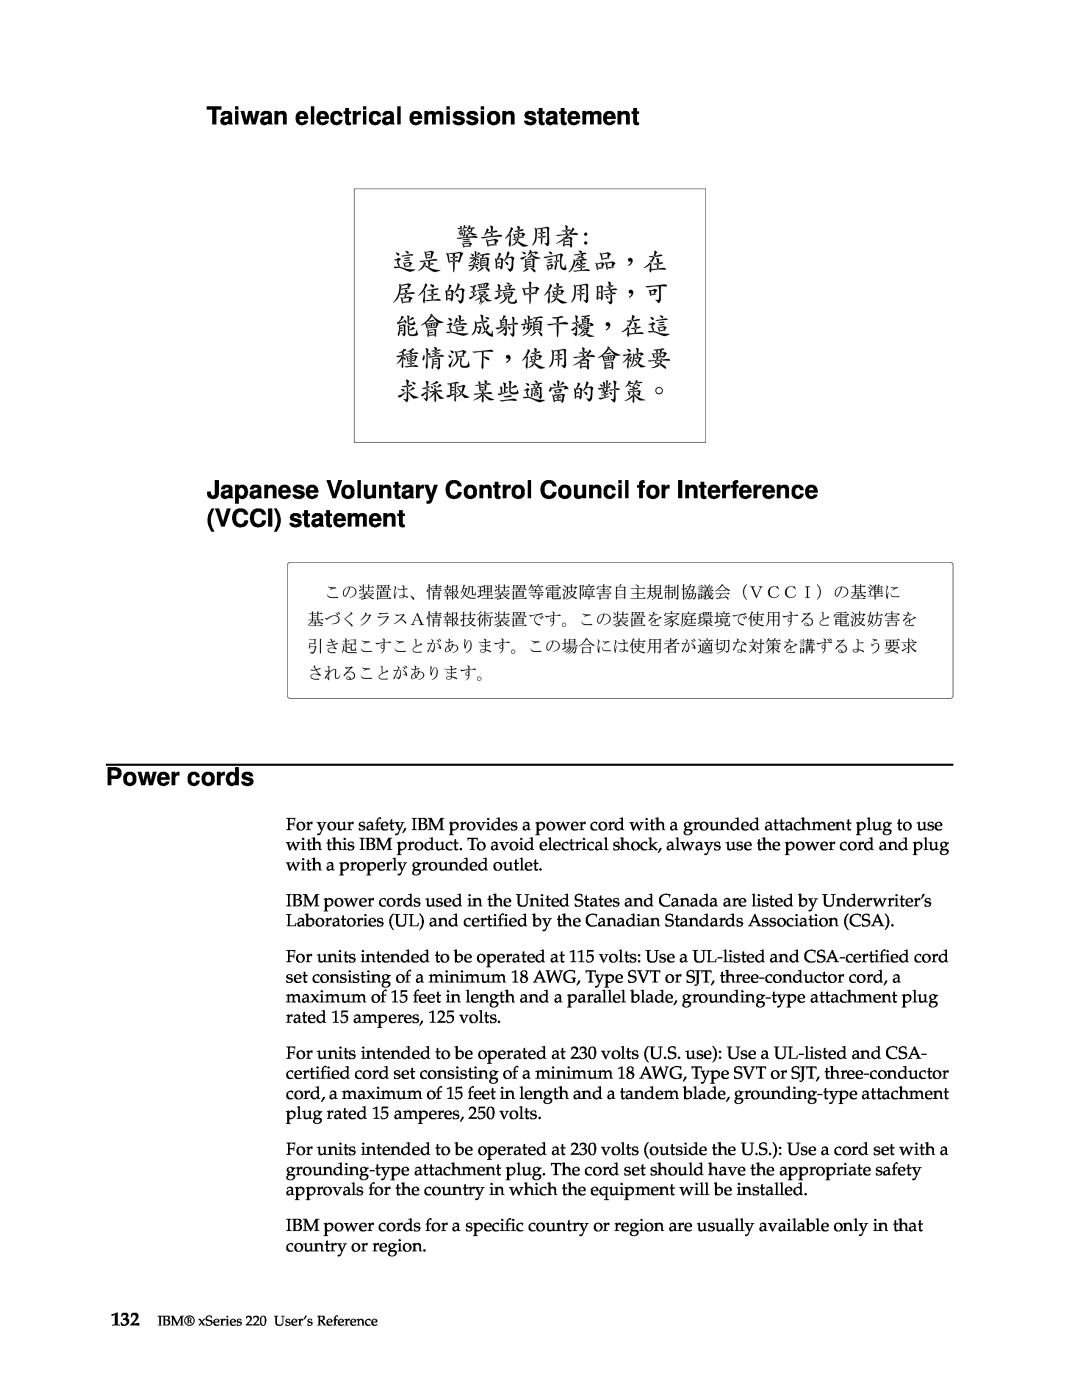 IBM 220 manual Taiwan electrical emission statement, Japanese Voluntary Control Council for Interference VCCI statement 